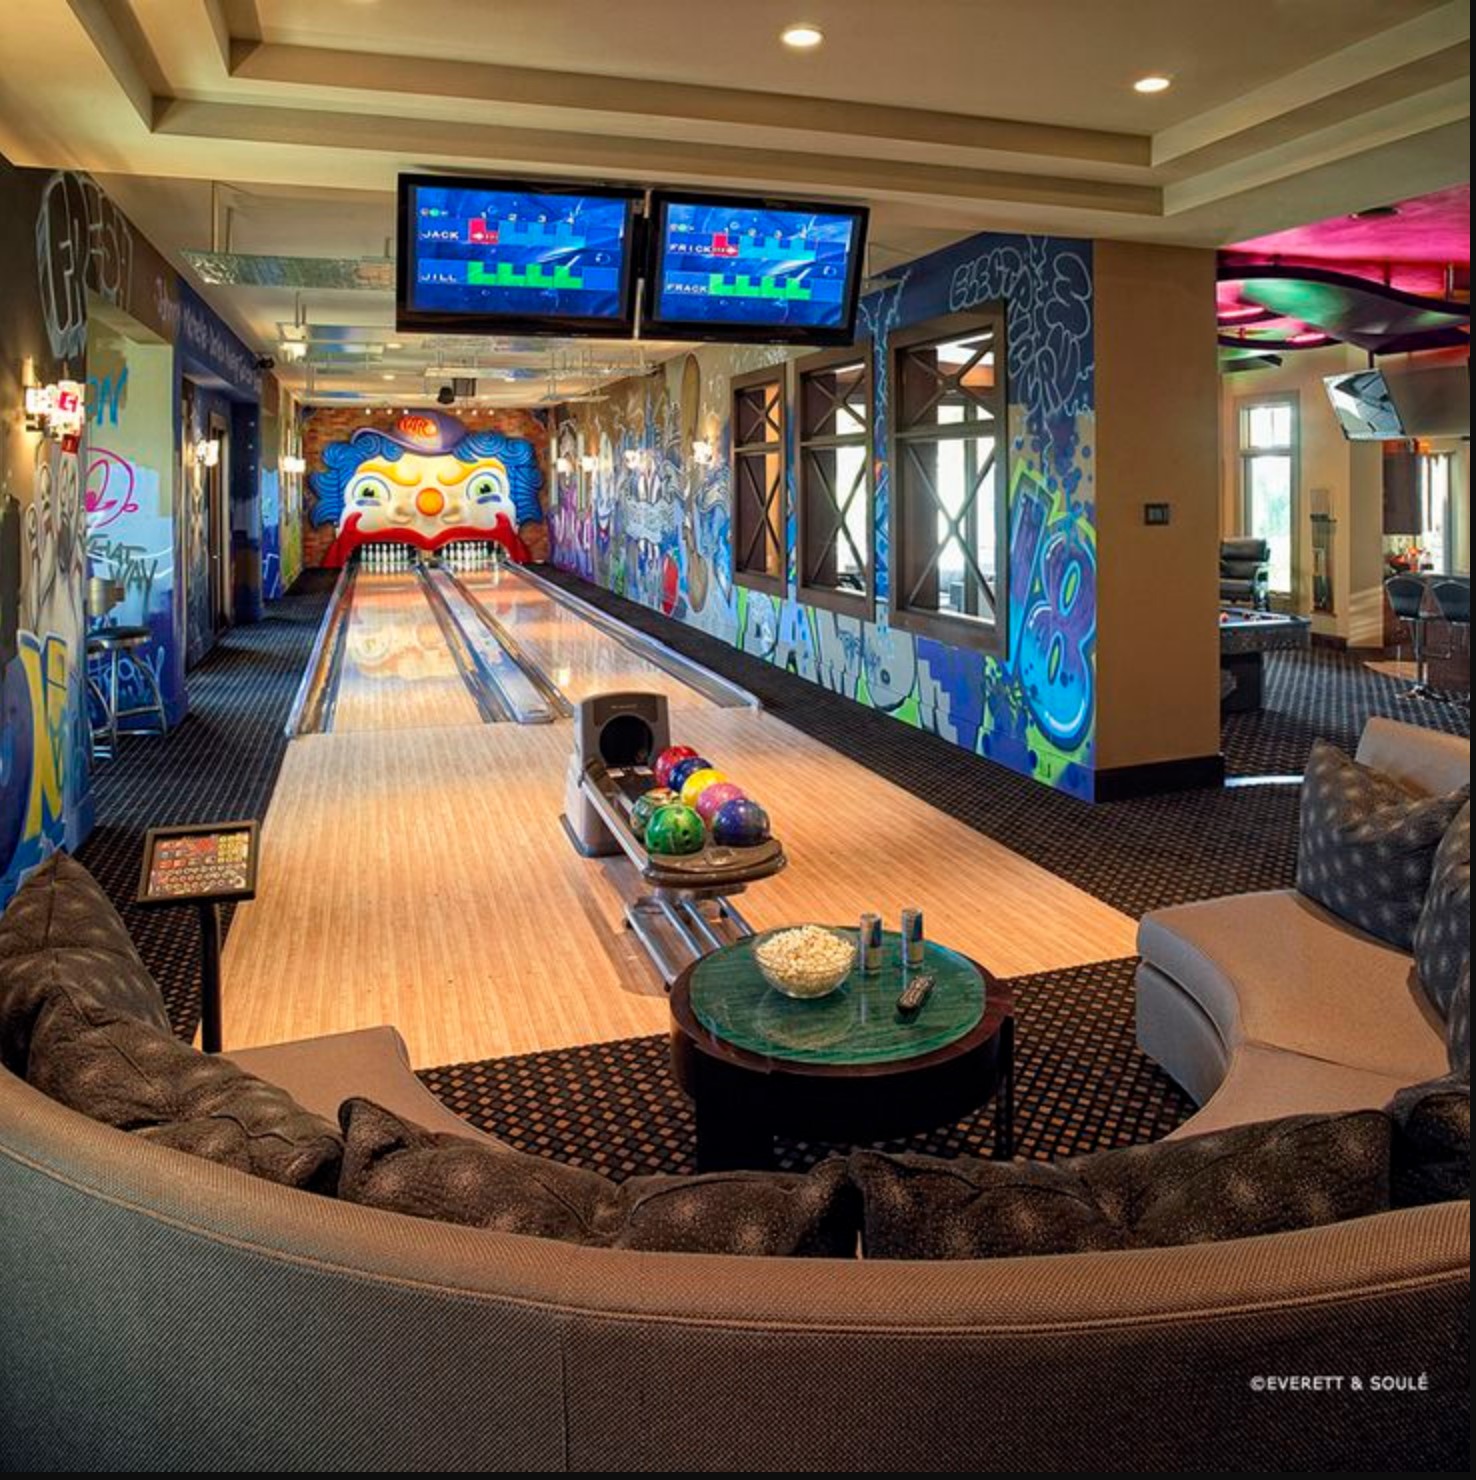 Bowling alley man cave